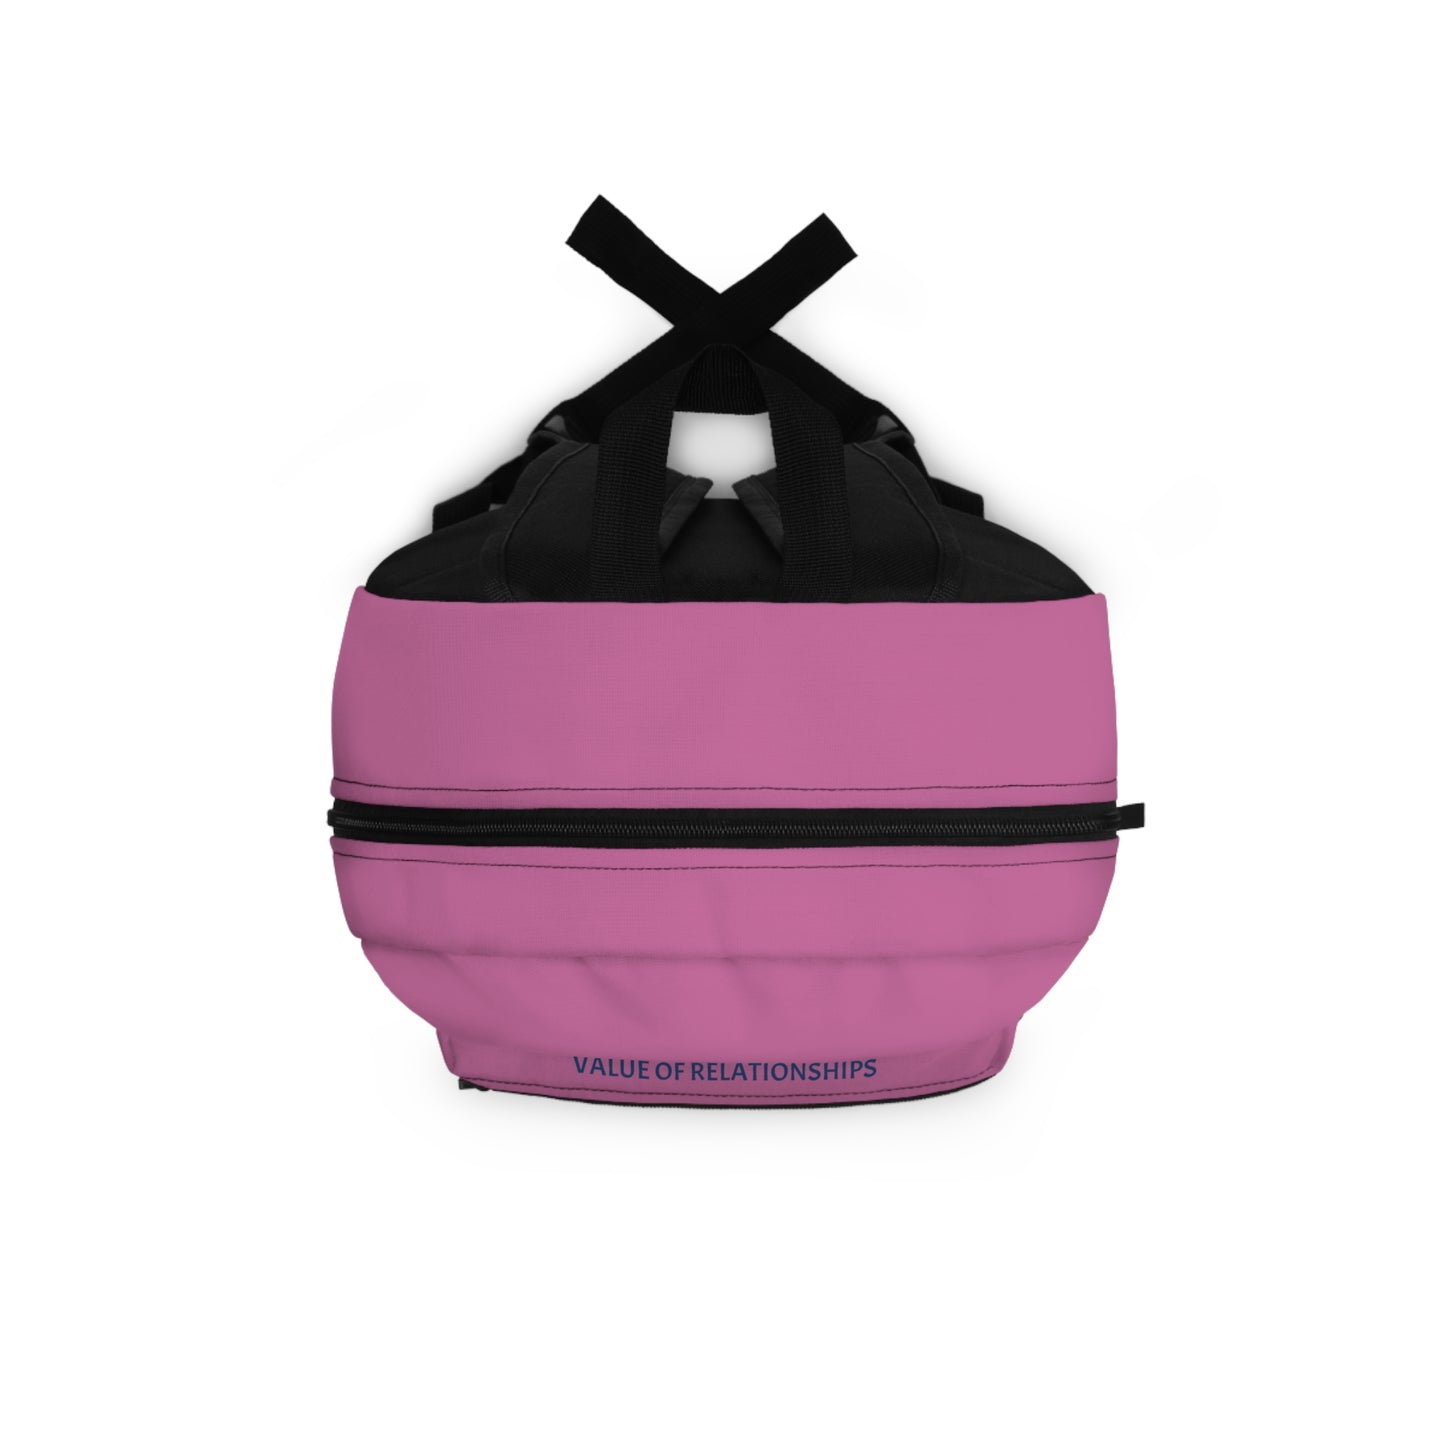 Meicher - Pink Backpack